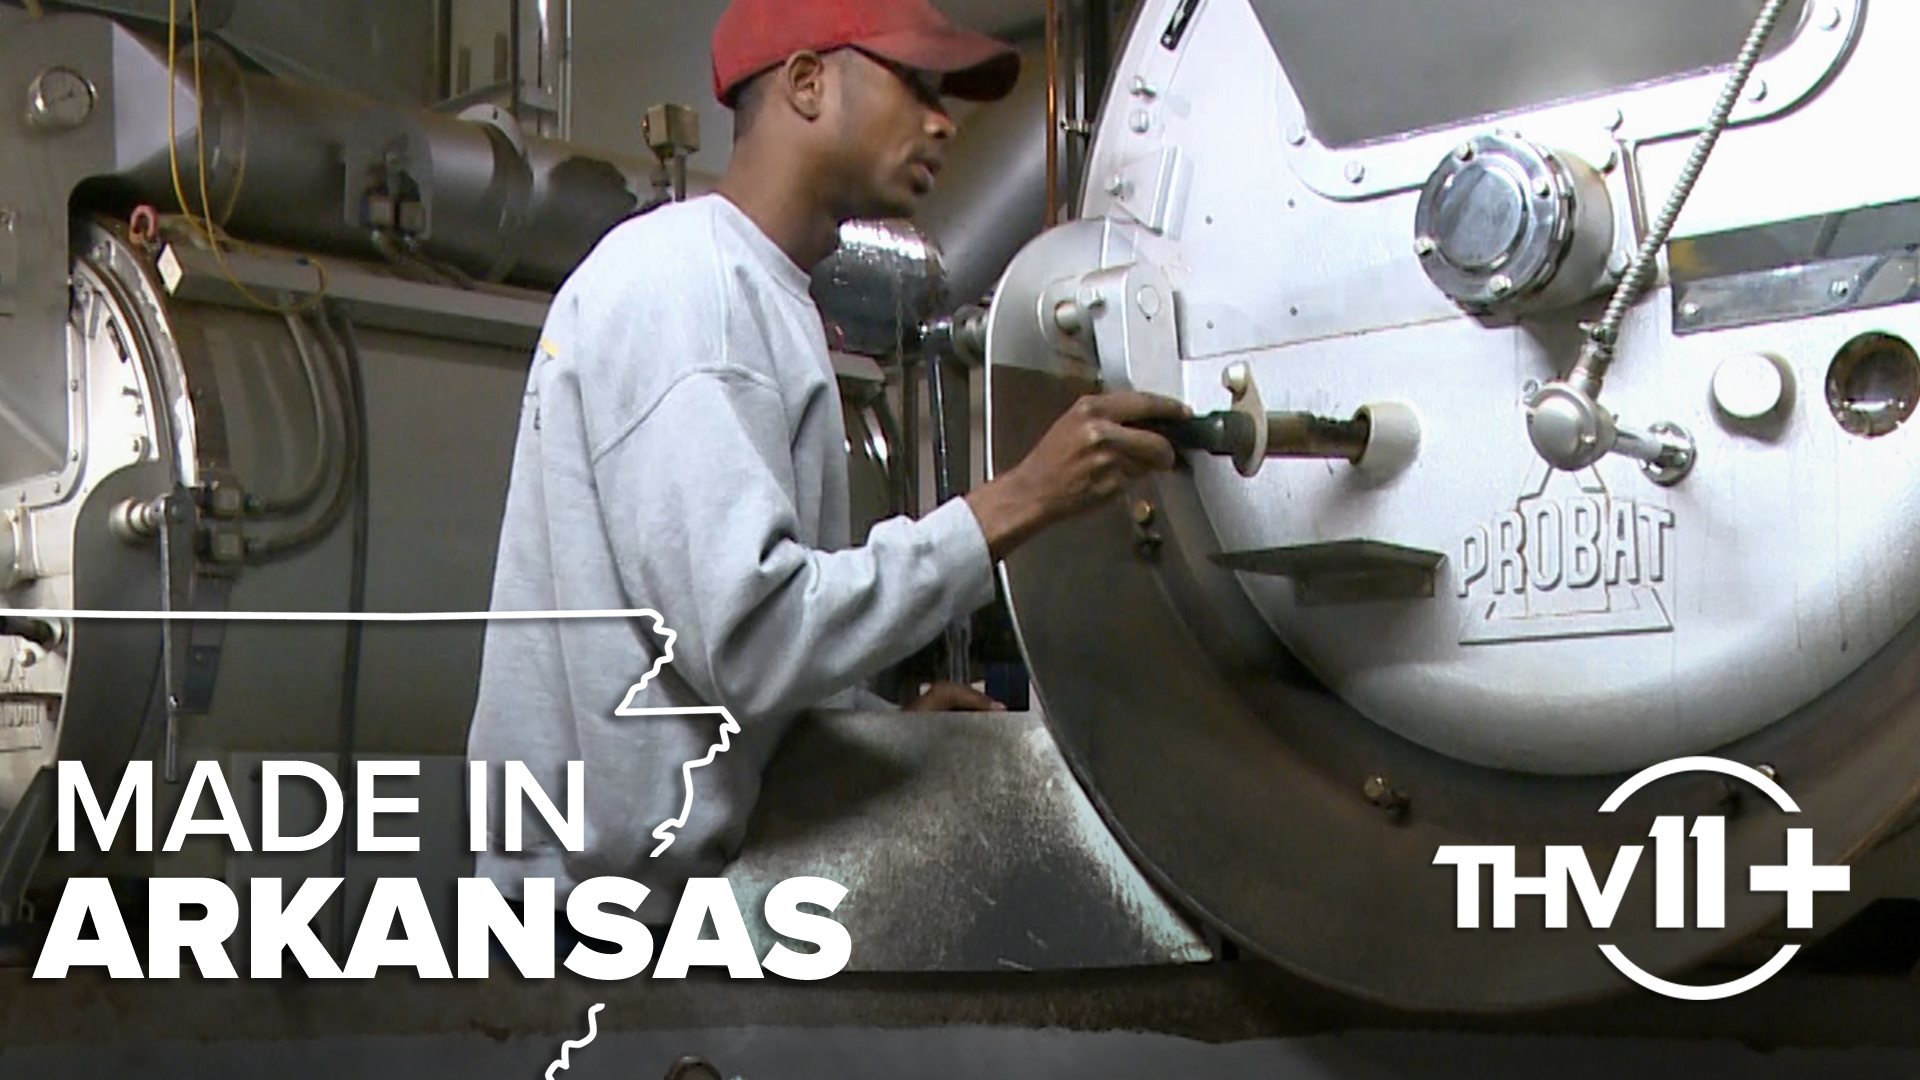 In this episode of Made in Arkansas we look at how local food is made including Westrock Coffee, De Waflebakkers, and more!